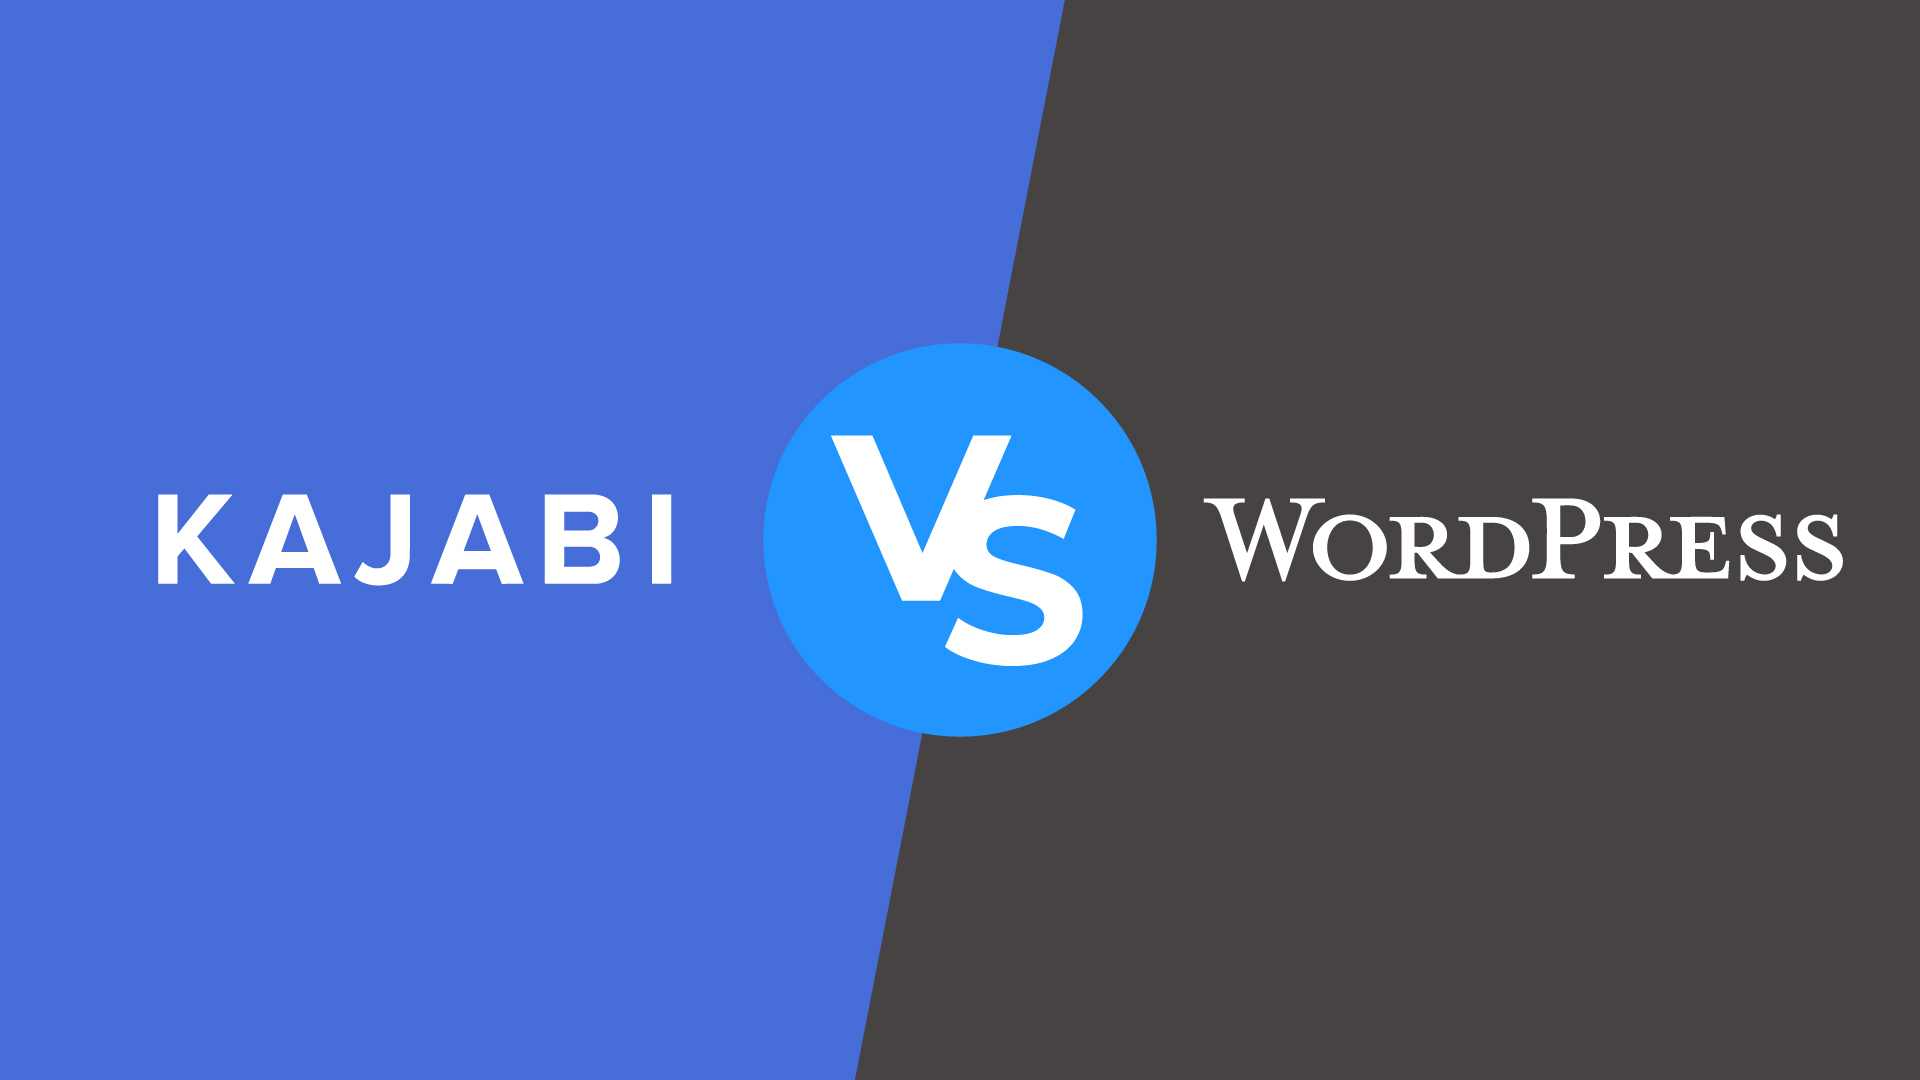 Kajabi vs. WordPress: Which is Better For Creating Courses and Membership Websites?